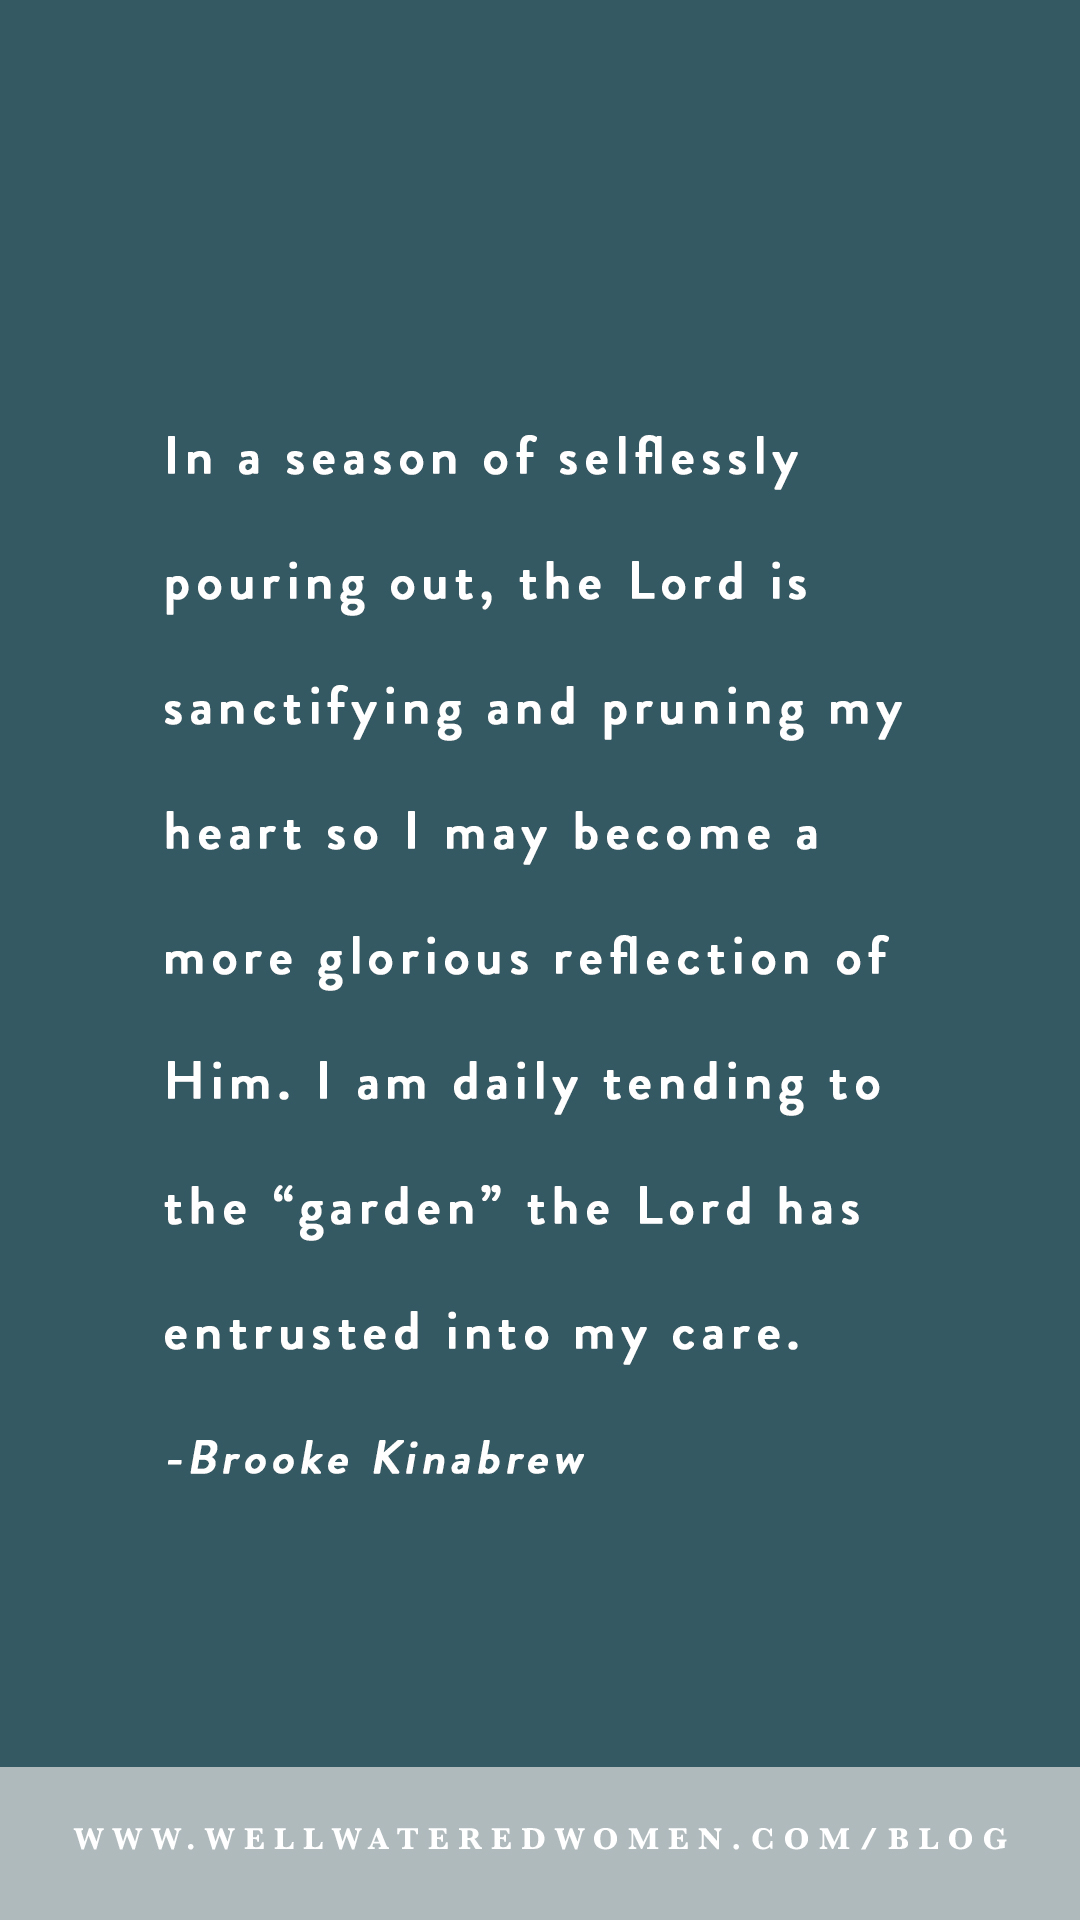 In a season of selflessly pouring out, the Lord is sanctifying and pruning my heart so I may become a more glorious reflection of Him. I am daily tending to the “garden” the Lord has entrusted into my care. Nurturing my tender shoots: my two boys.